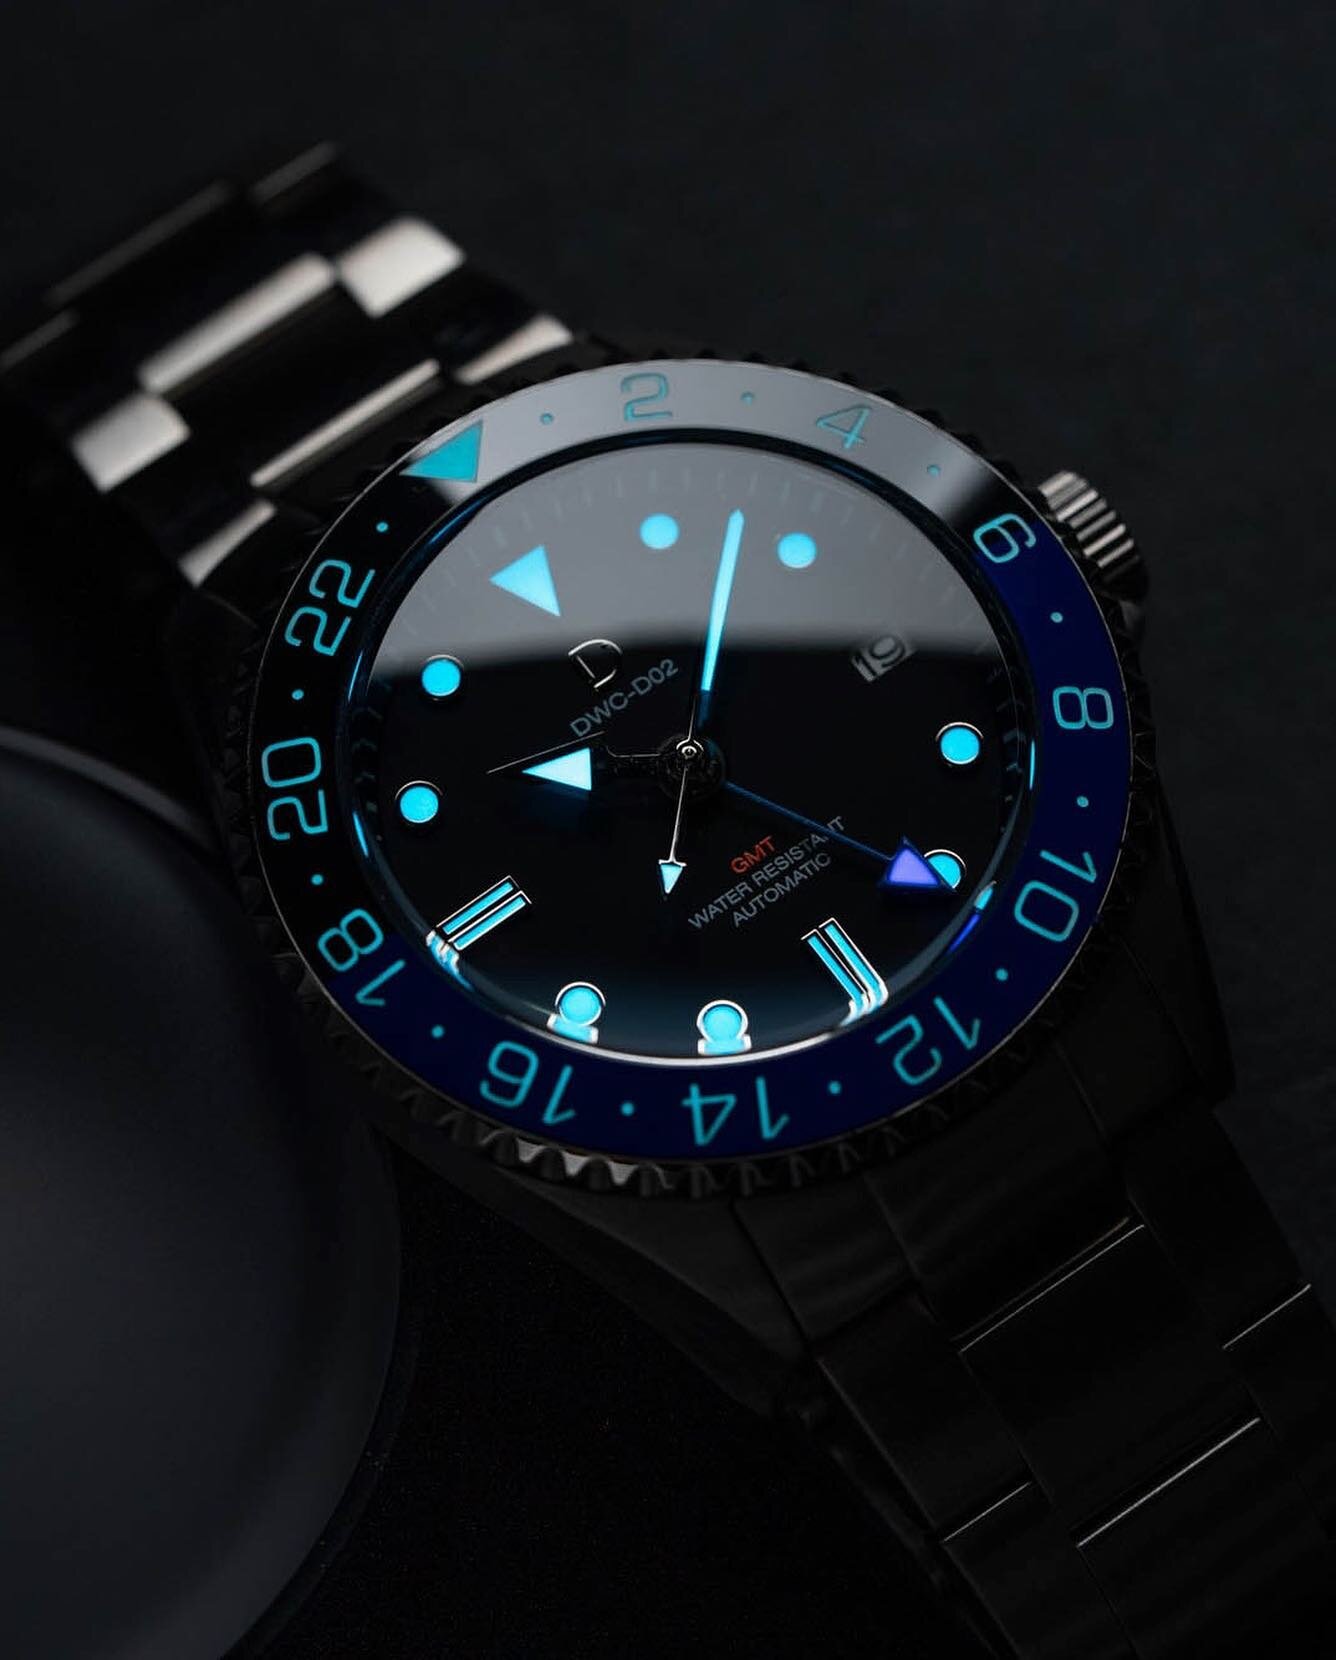 📸 Behold this stunning lume shot, showcasing the luminosity of our timepiece like never before. 🔦⌚️
🔬 Did you know you can create your own lume dial and hands at home? It's true! Our luming kit provides everything you need to unleash your creativi